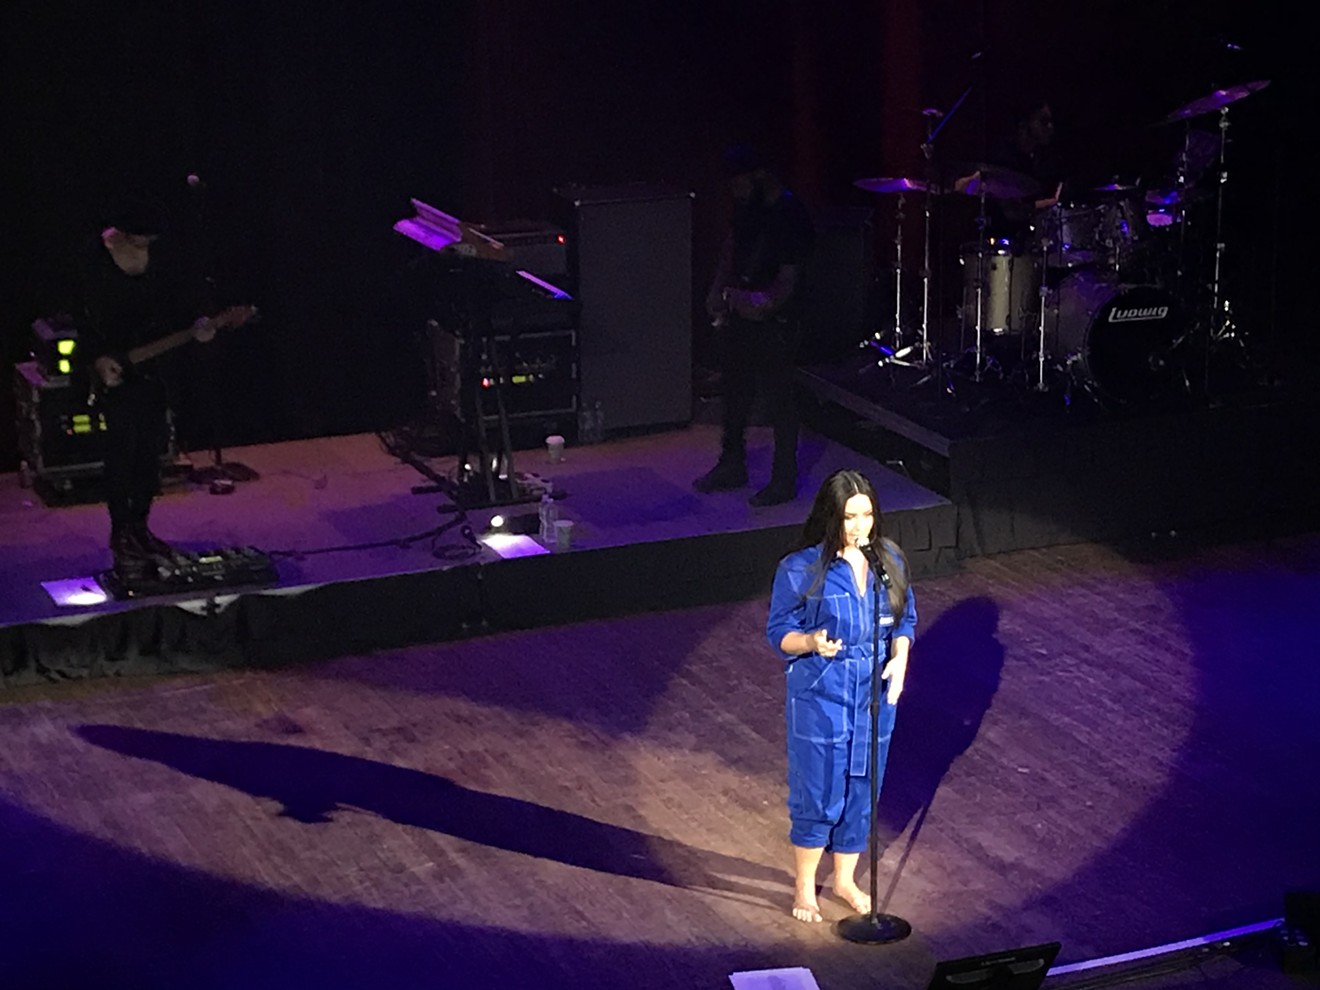 Demi Lovato stopped her show about three songs in and took off her shoes. She performed the rest of the set barefoot.